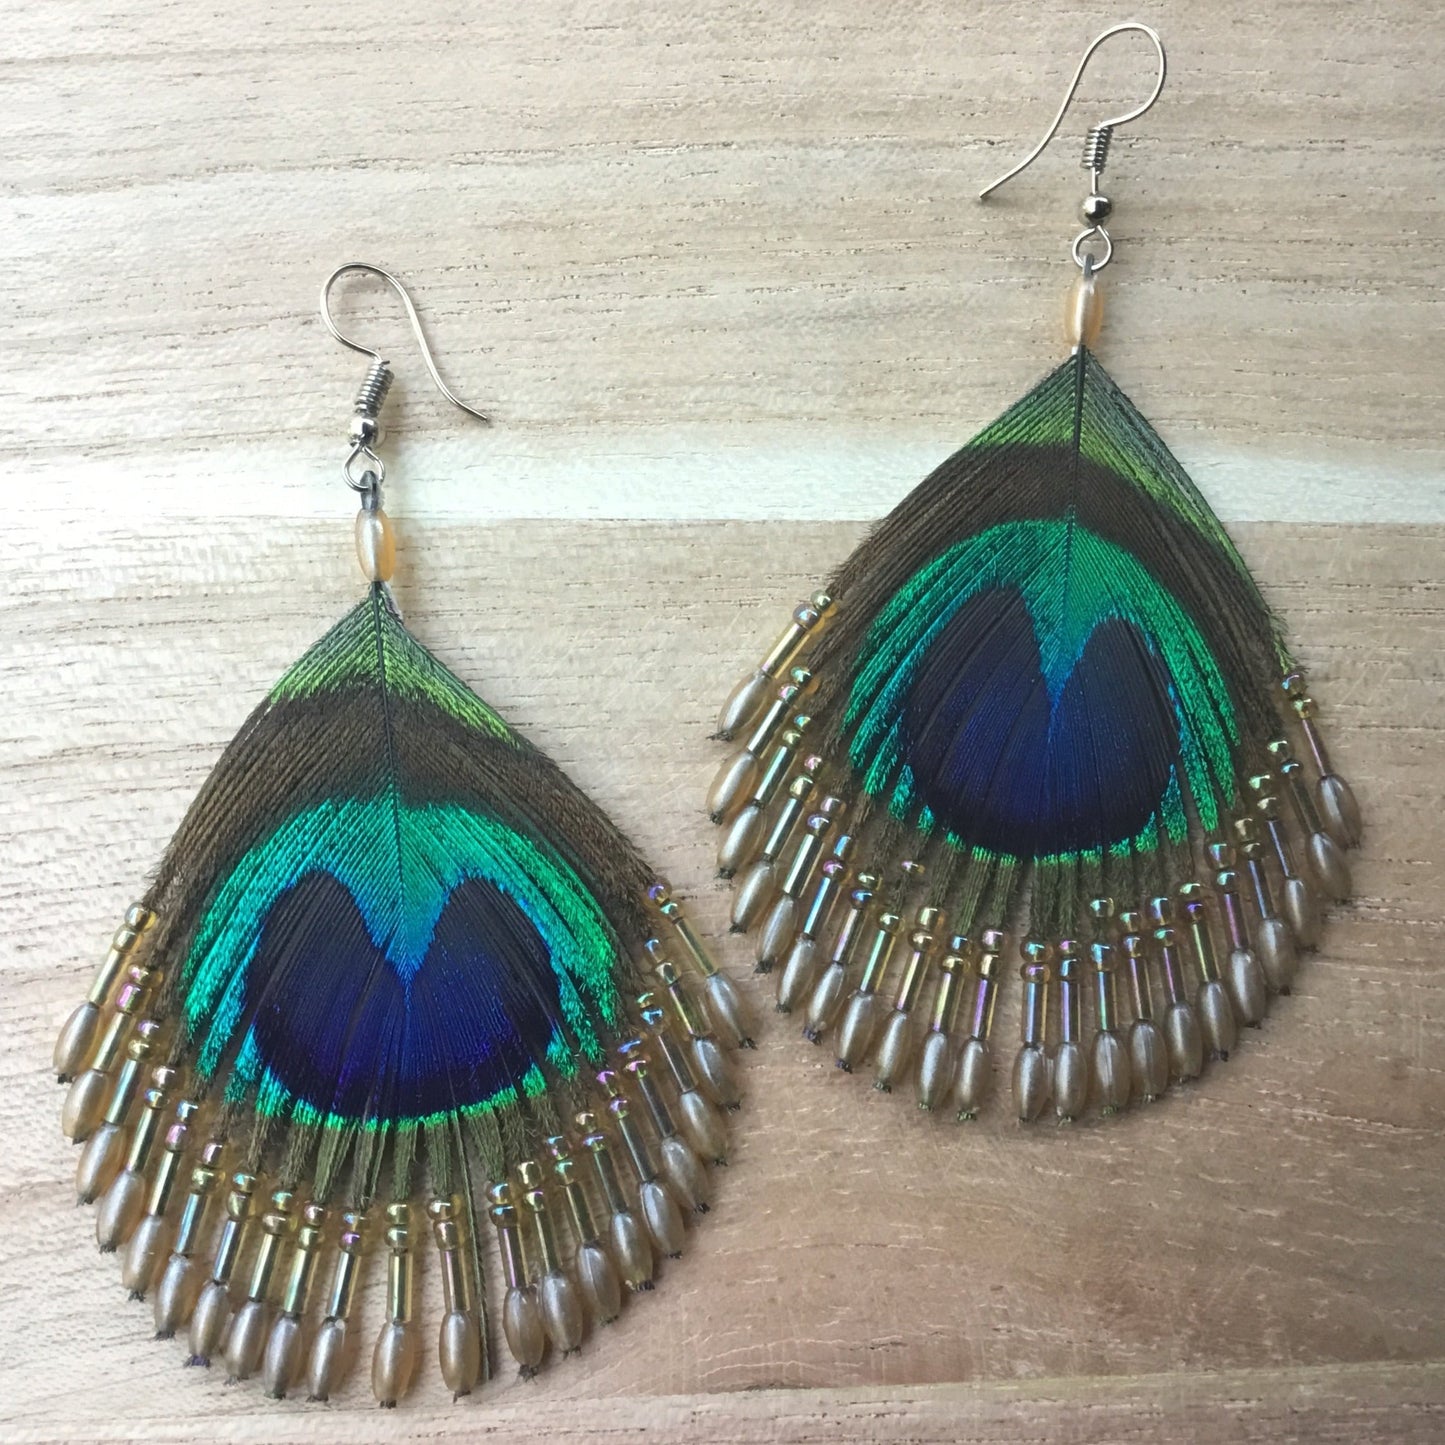 Peacock feather earrings with pearl beads.